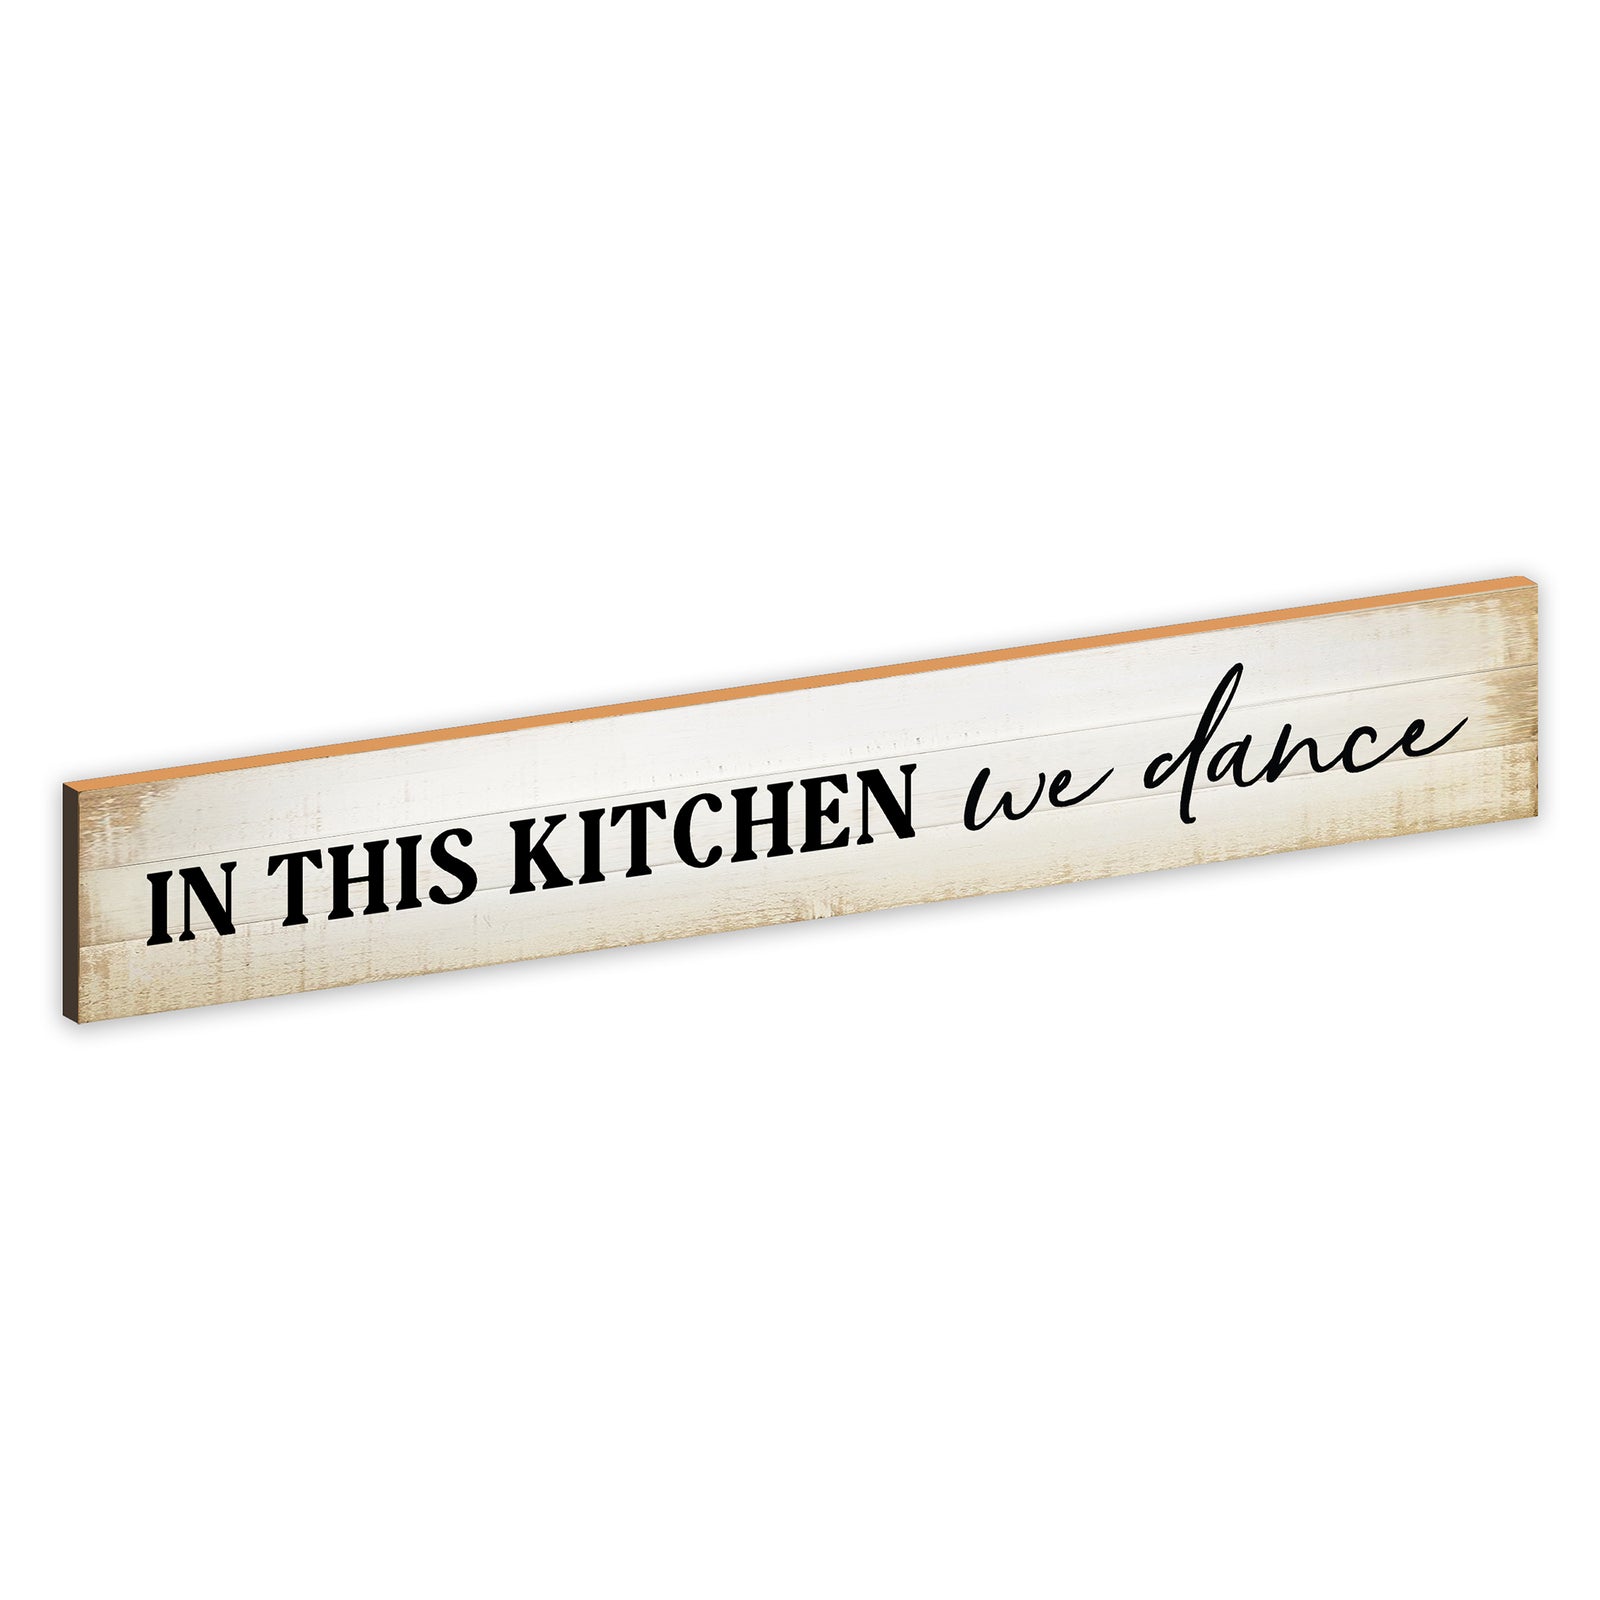 Vintage Wooden Kitchen Wall Plaque For Home Décor And Gift Ideas - In This Kitchen We Dance